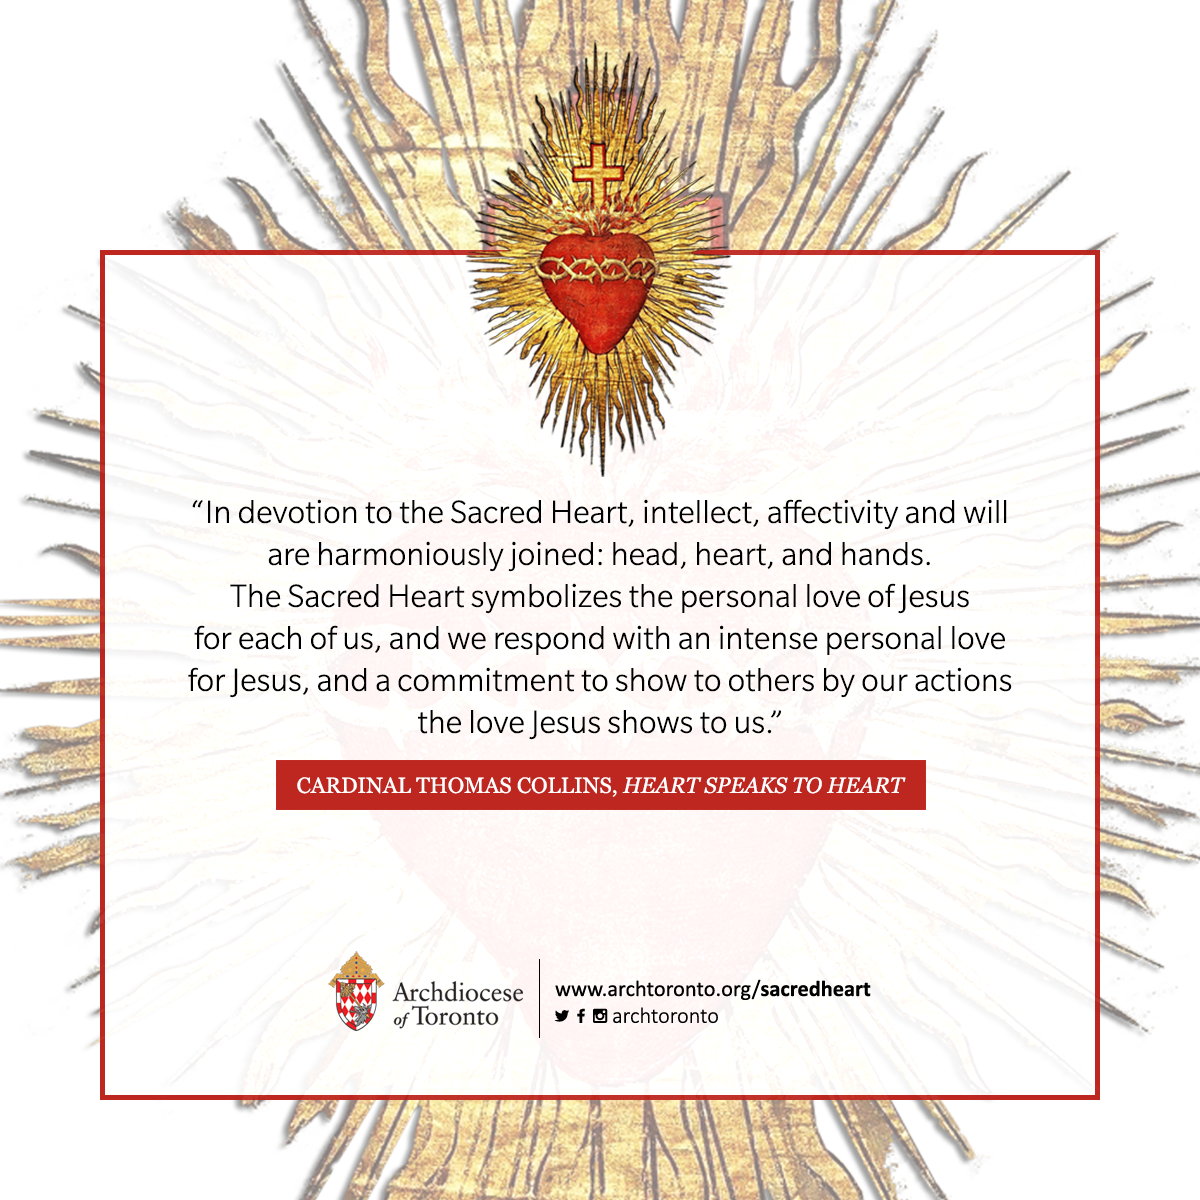 In devotion to the Sacred Heart, intellect, affectivity and will are harmoniously joined: head, heart, and hands. The Sacred Heart symbolizes the personal love of Jesus for each of us, and we respond with an intense personal love for Jesus, and a commitment to show to others by our actions the love Jesus shows to us.